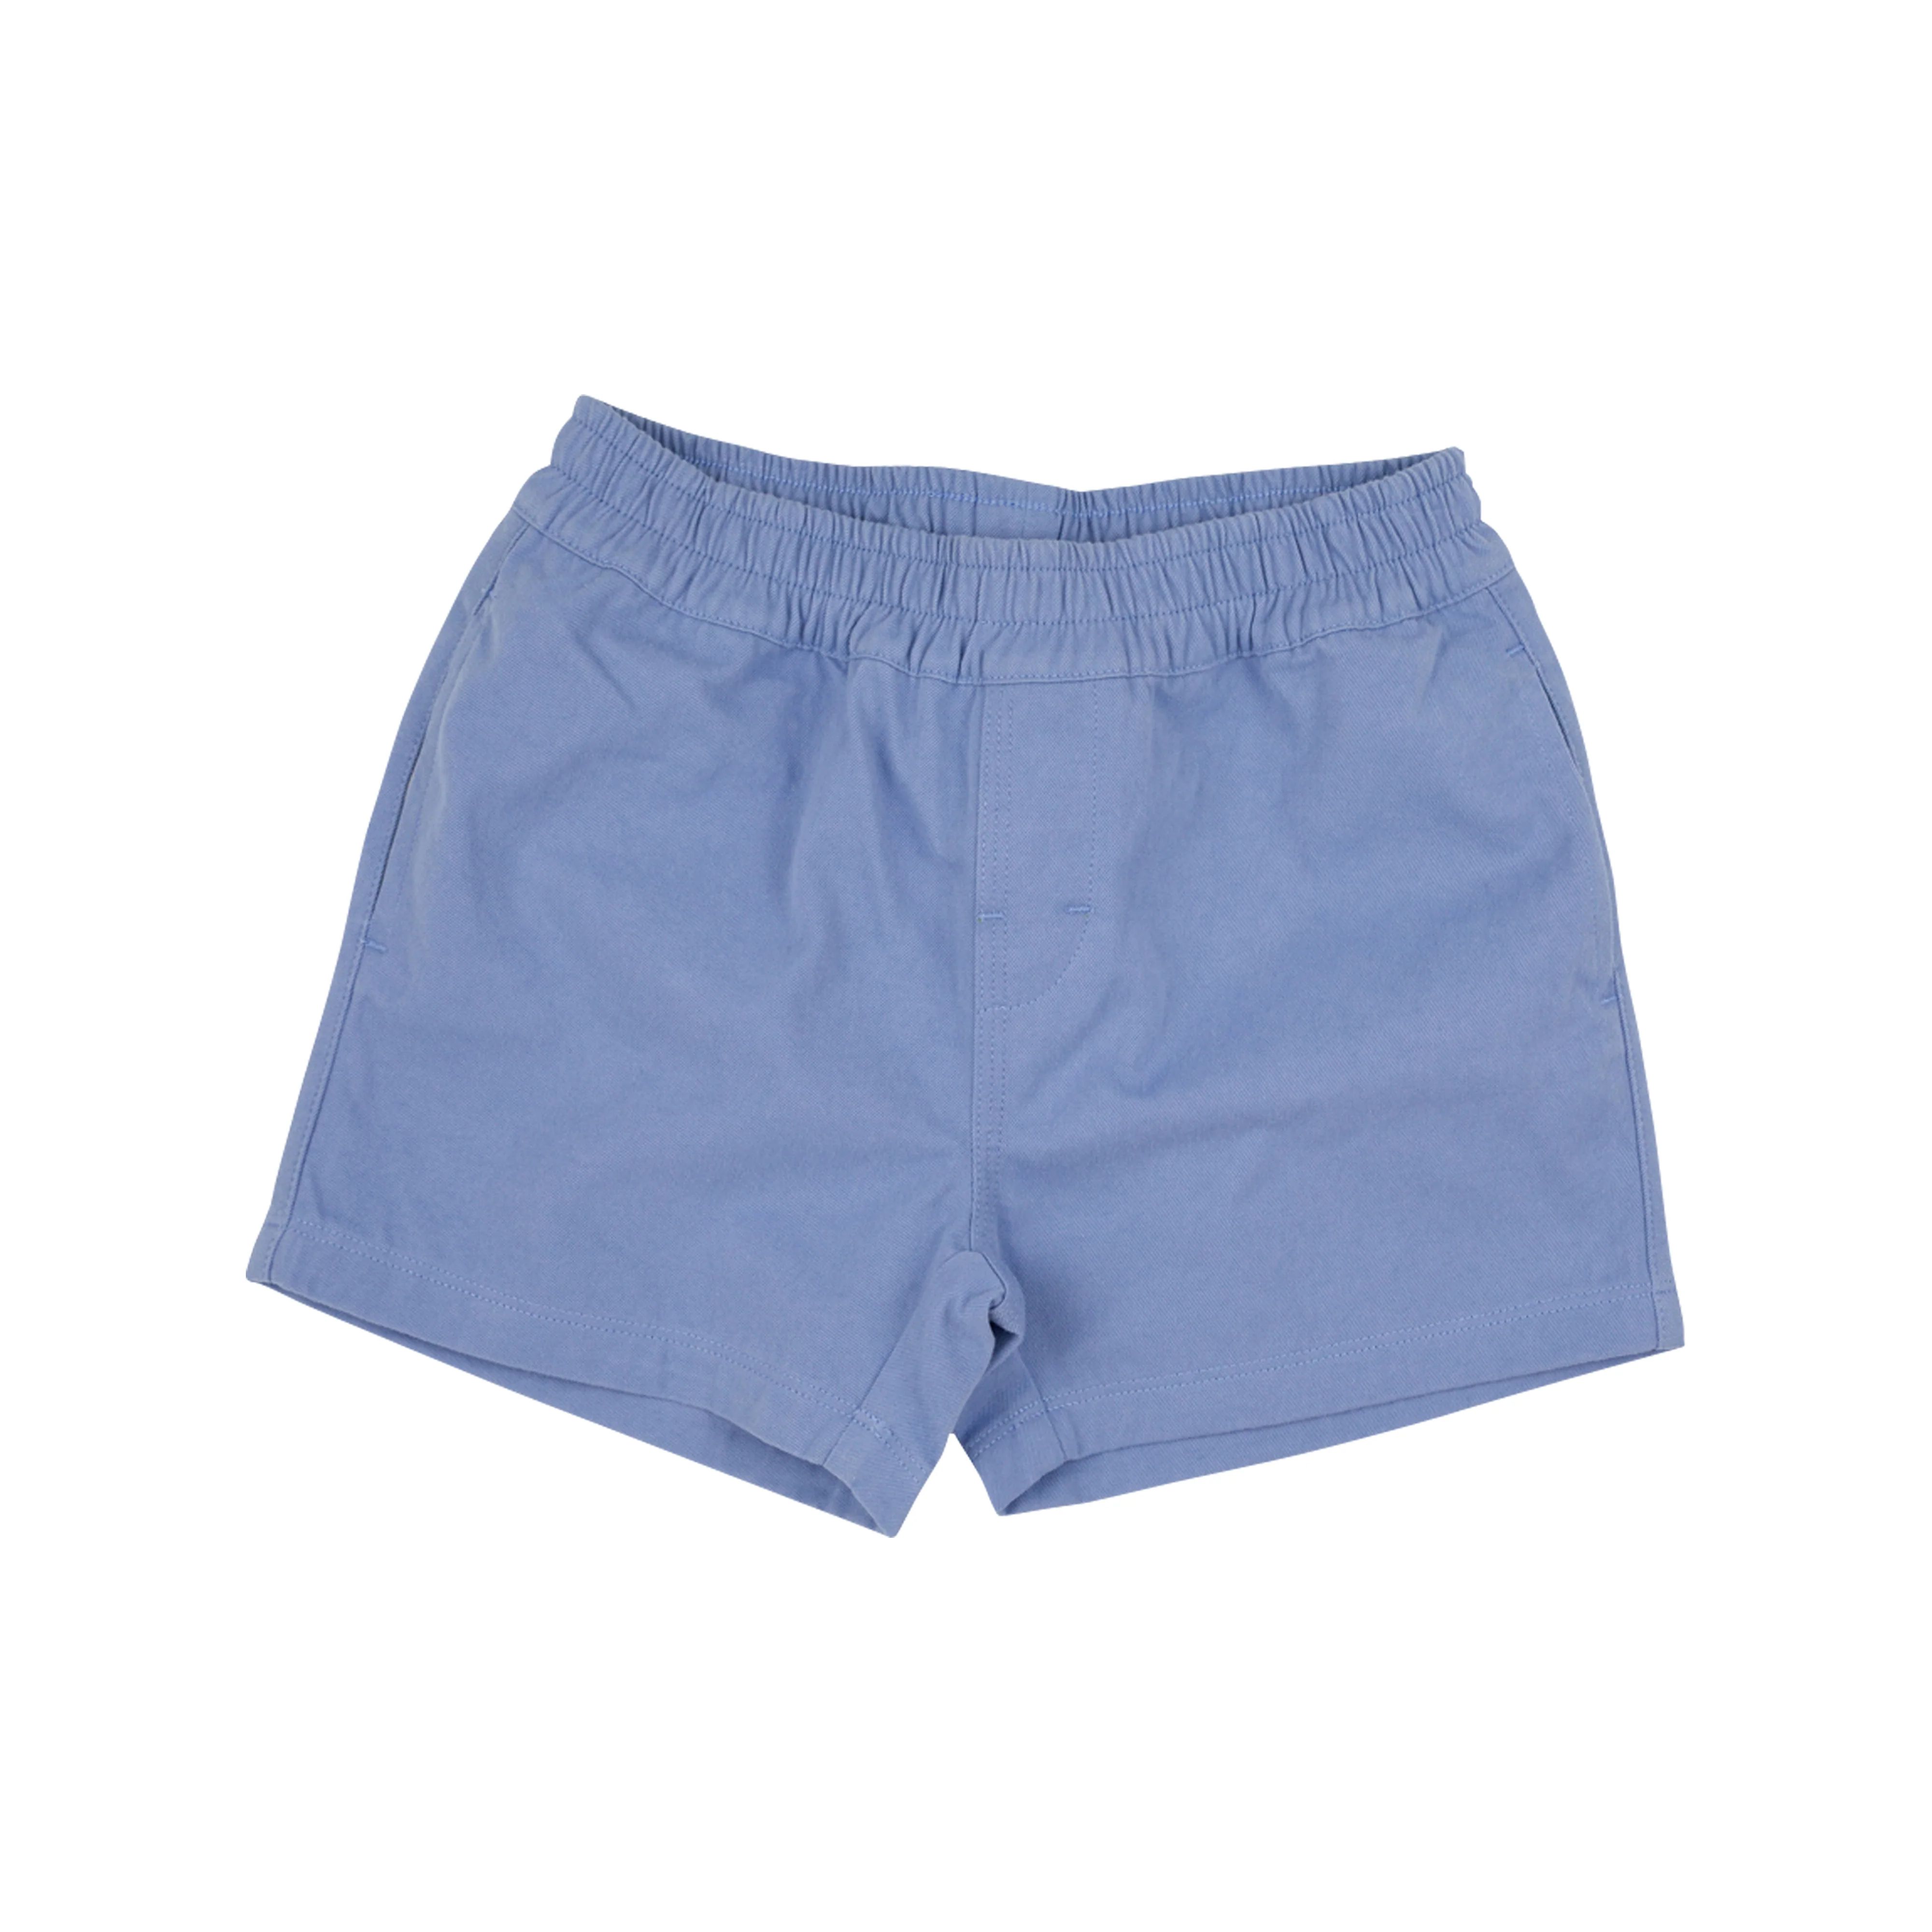 Sheffield Shorts - Park City Periwinkle with Worth Avenue White Stork | The Beaufort Bonnet Company